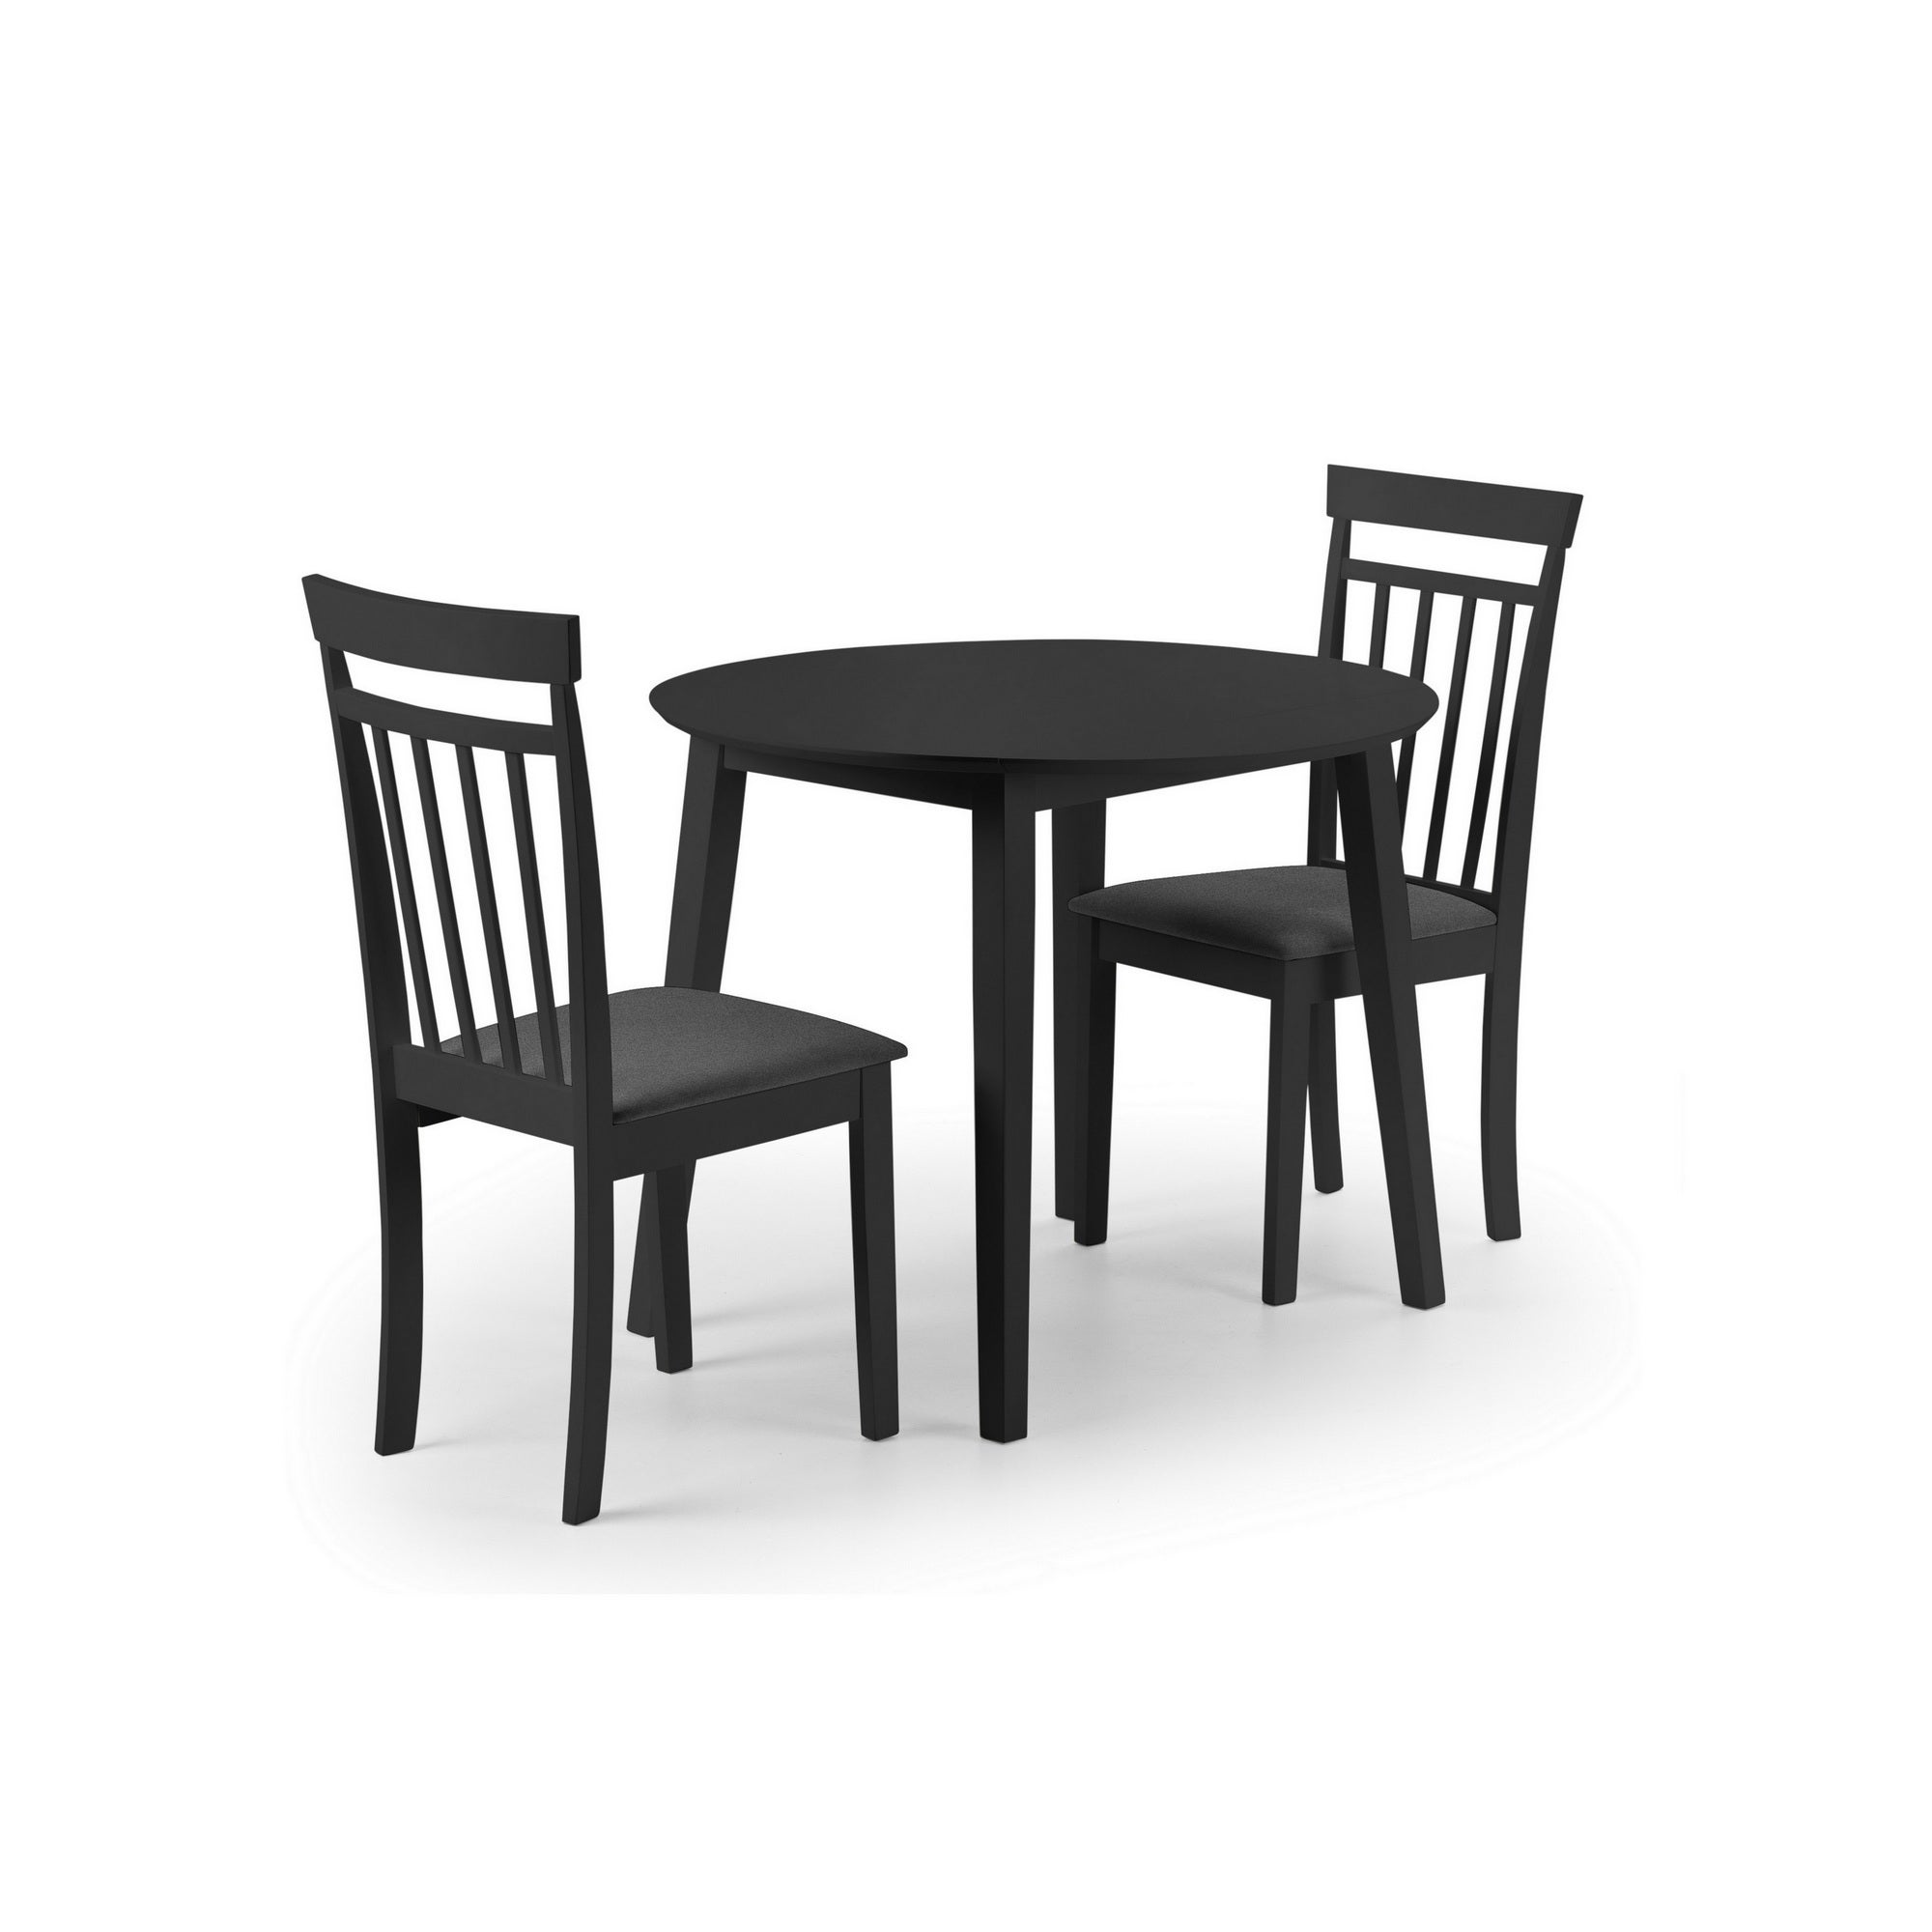 Coast Round Drop Leaf Dining Table with 4 Coast Chairs Black